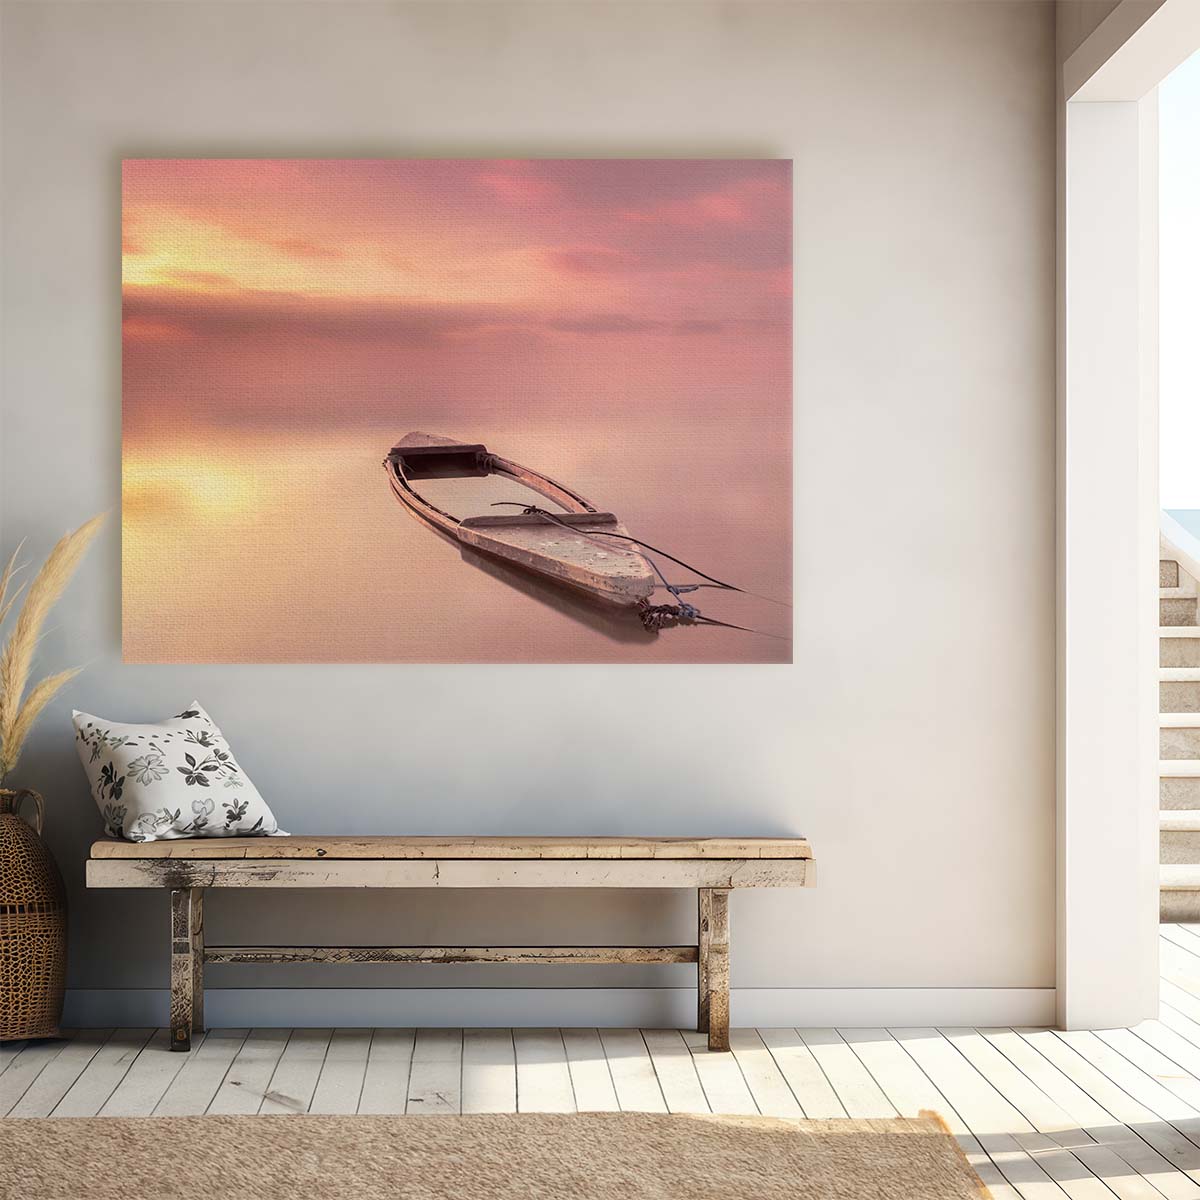 Sunrise Seascape Abandoned Boat in Tarragona Wall Art by Luxuriance Designs. Made in USA.